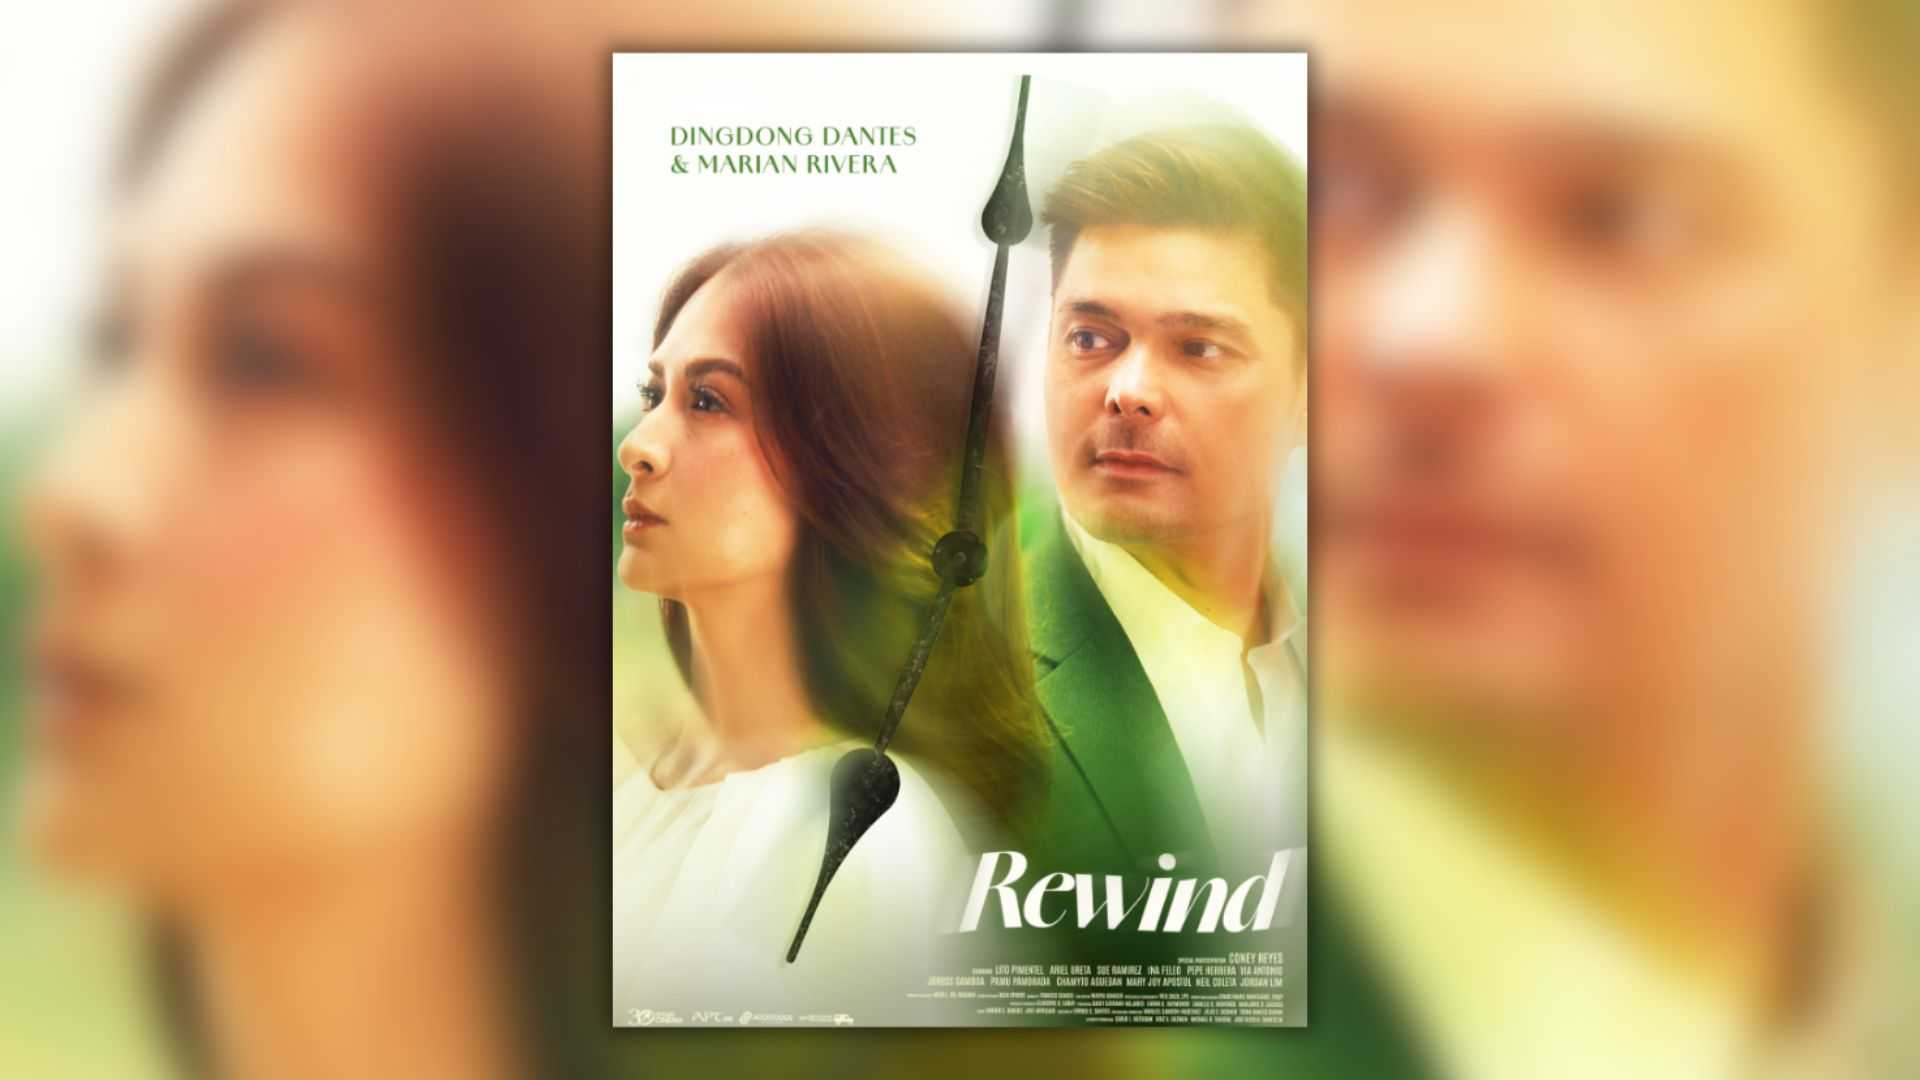 ‘Rewind’ breaks record as ‘highest grossing film’ after earning over P900M